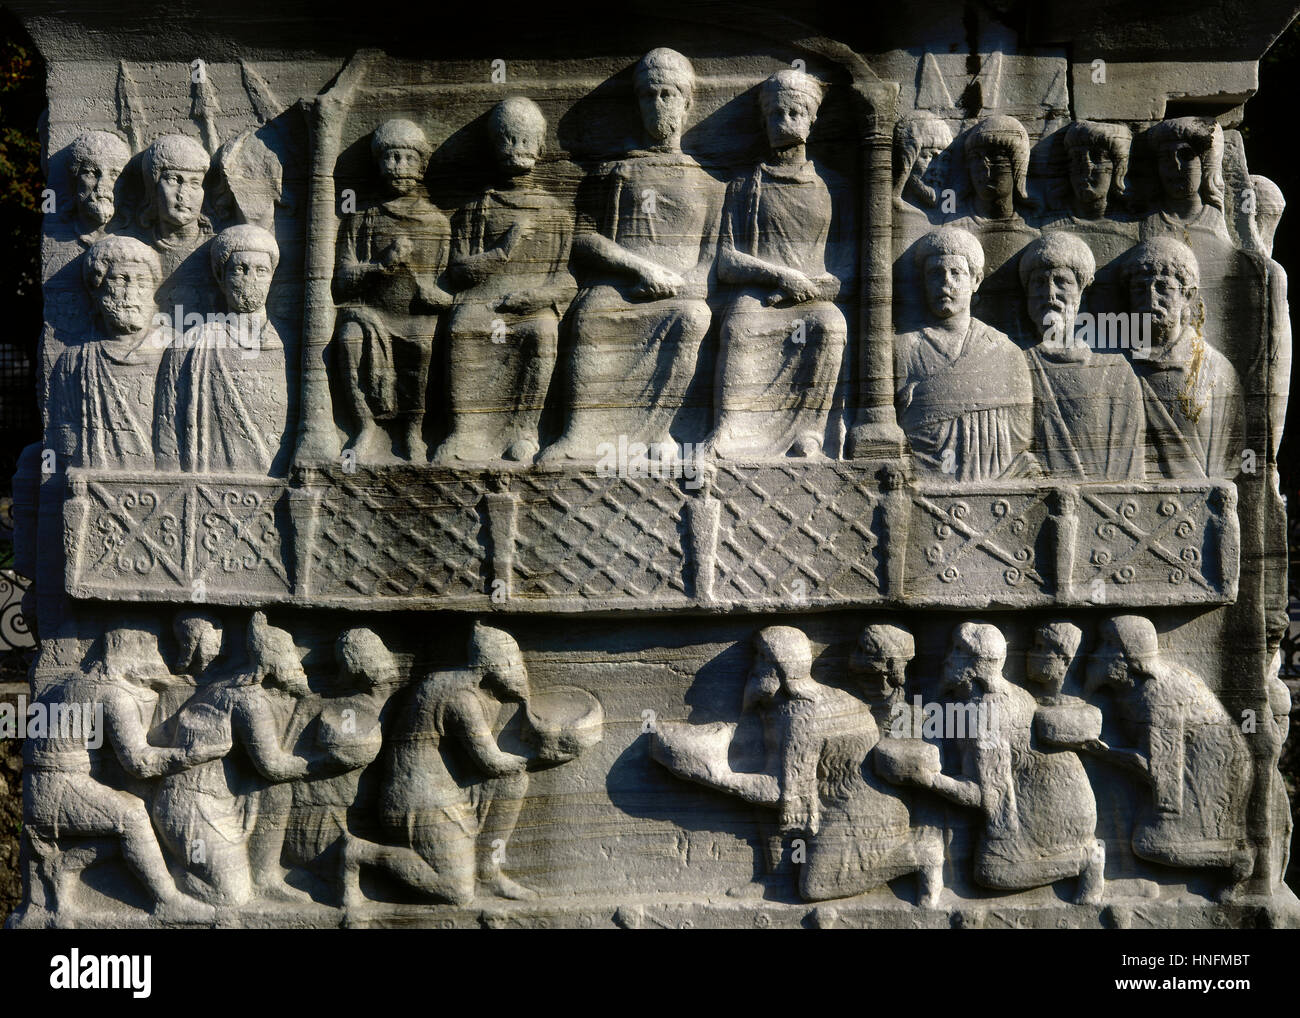 Obelisk of Theodosius. Pedestal. Submission of the barbarians (Wet face). 4th century AD. Ancient Hippodrome of Constantinople. Istanbul, Turkey. Stock Photo